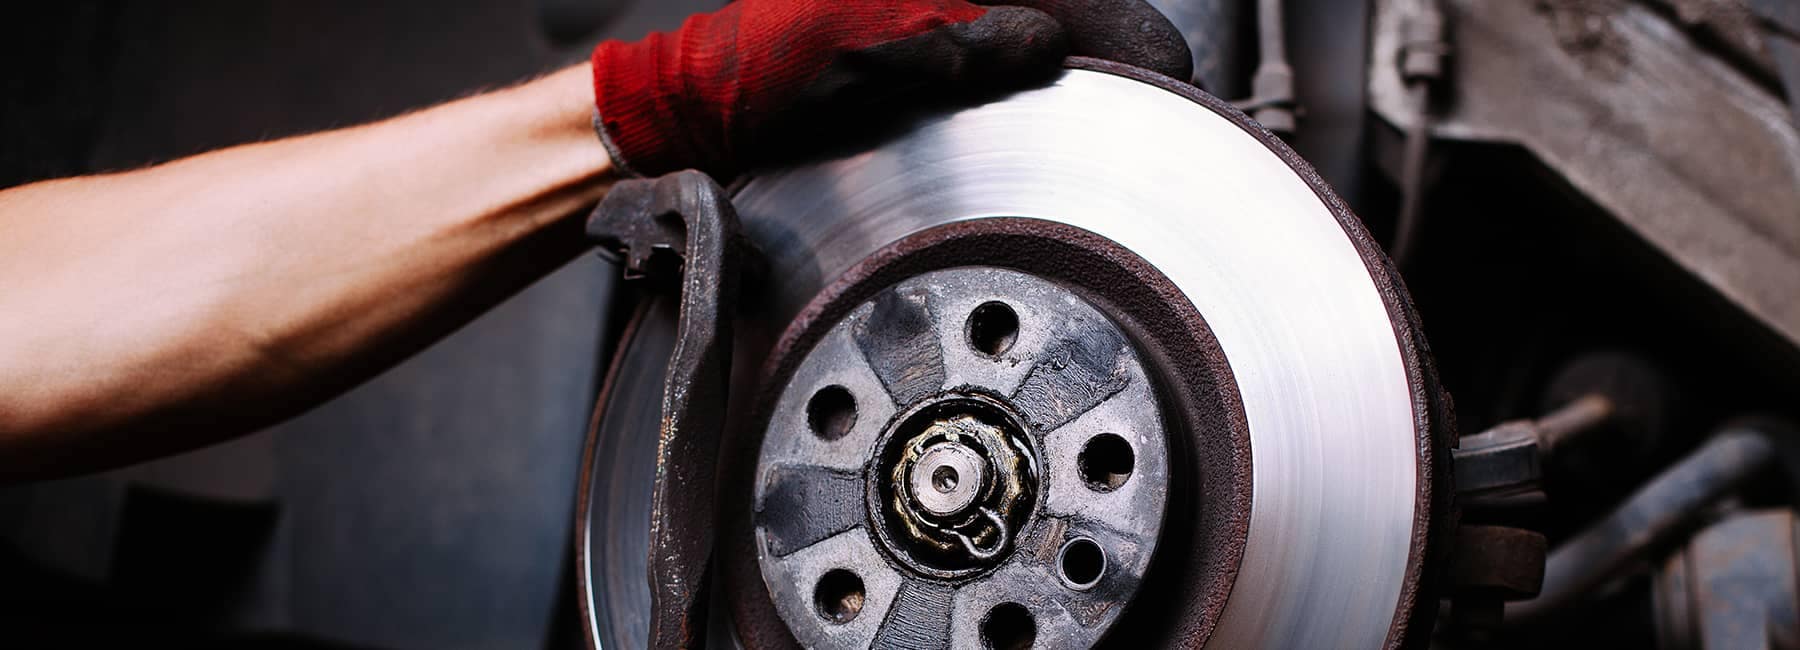 Replacing brakes on a tire of a vehicle